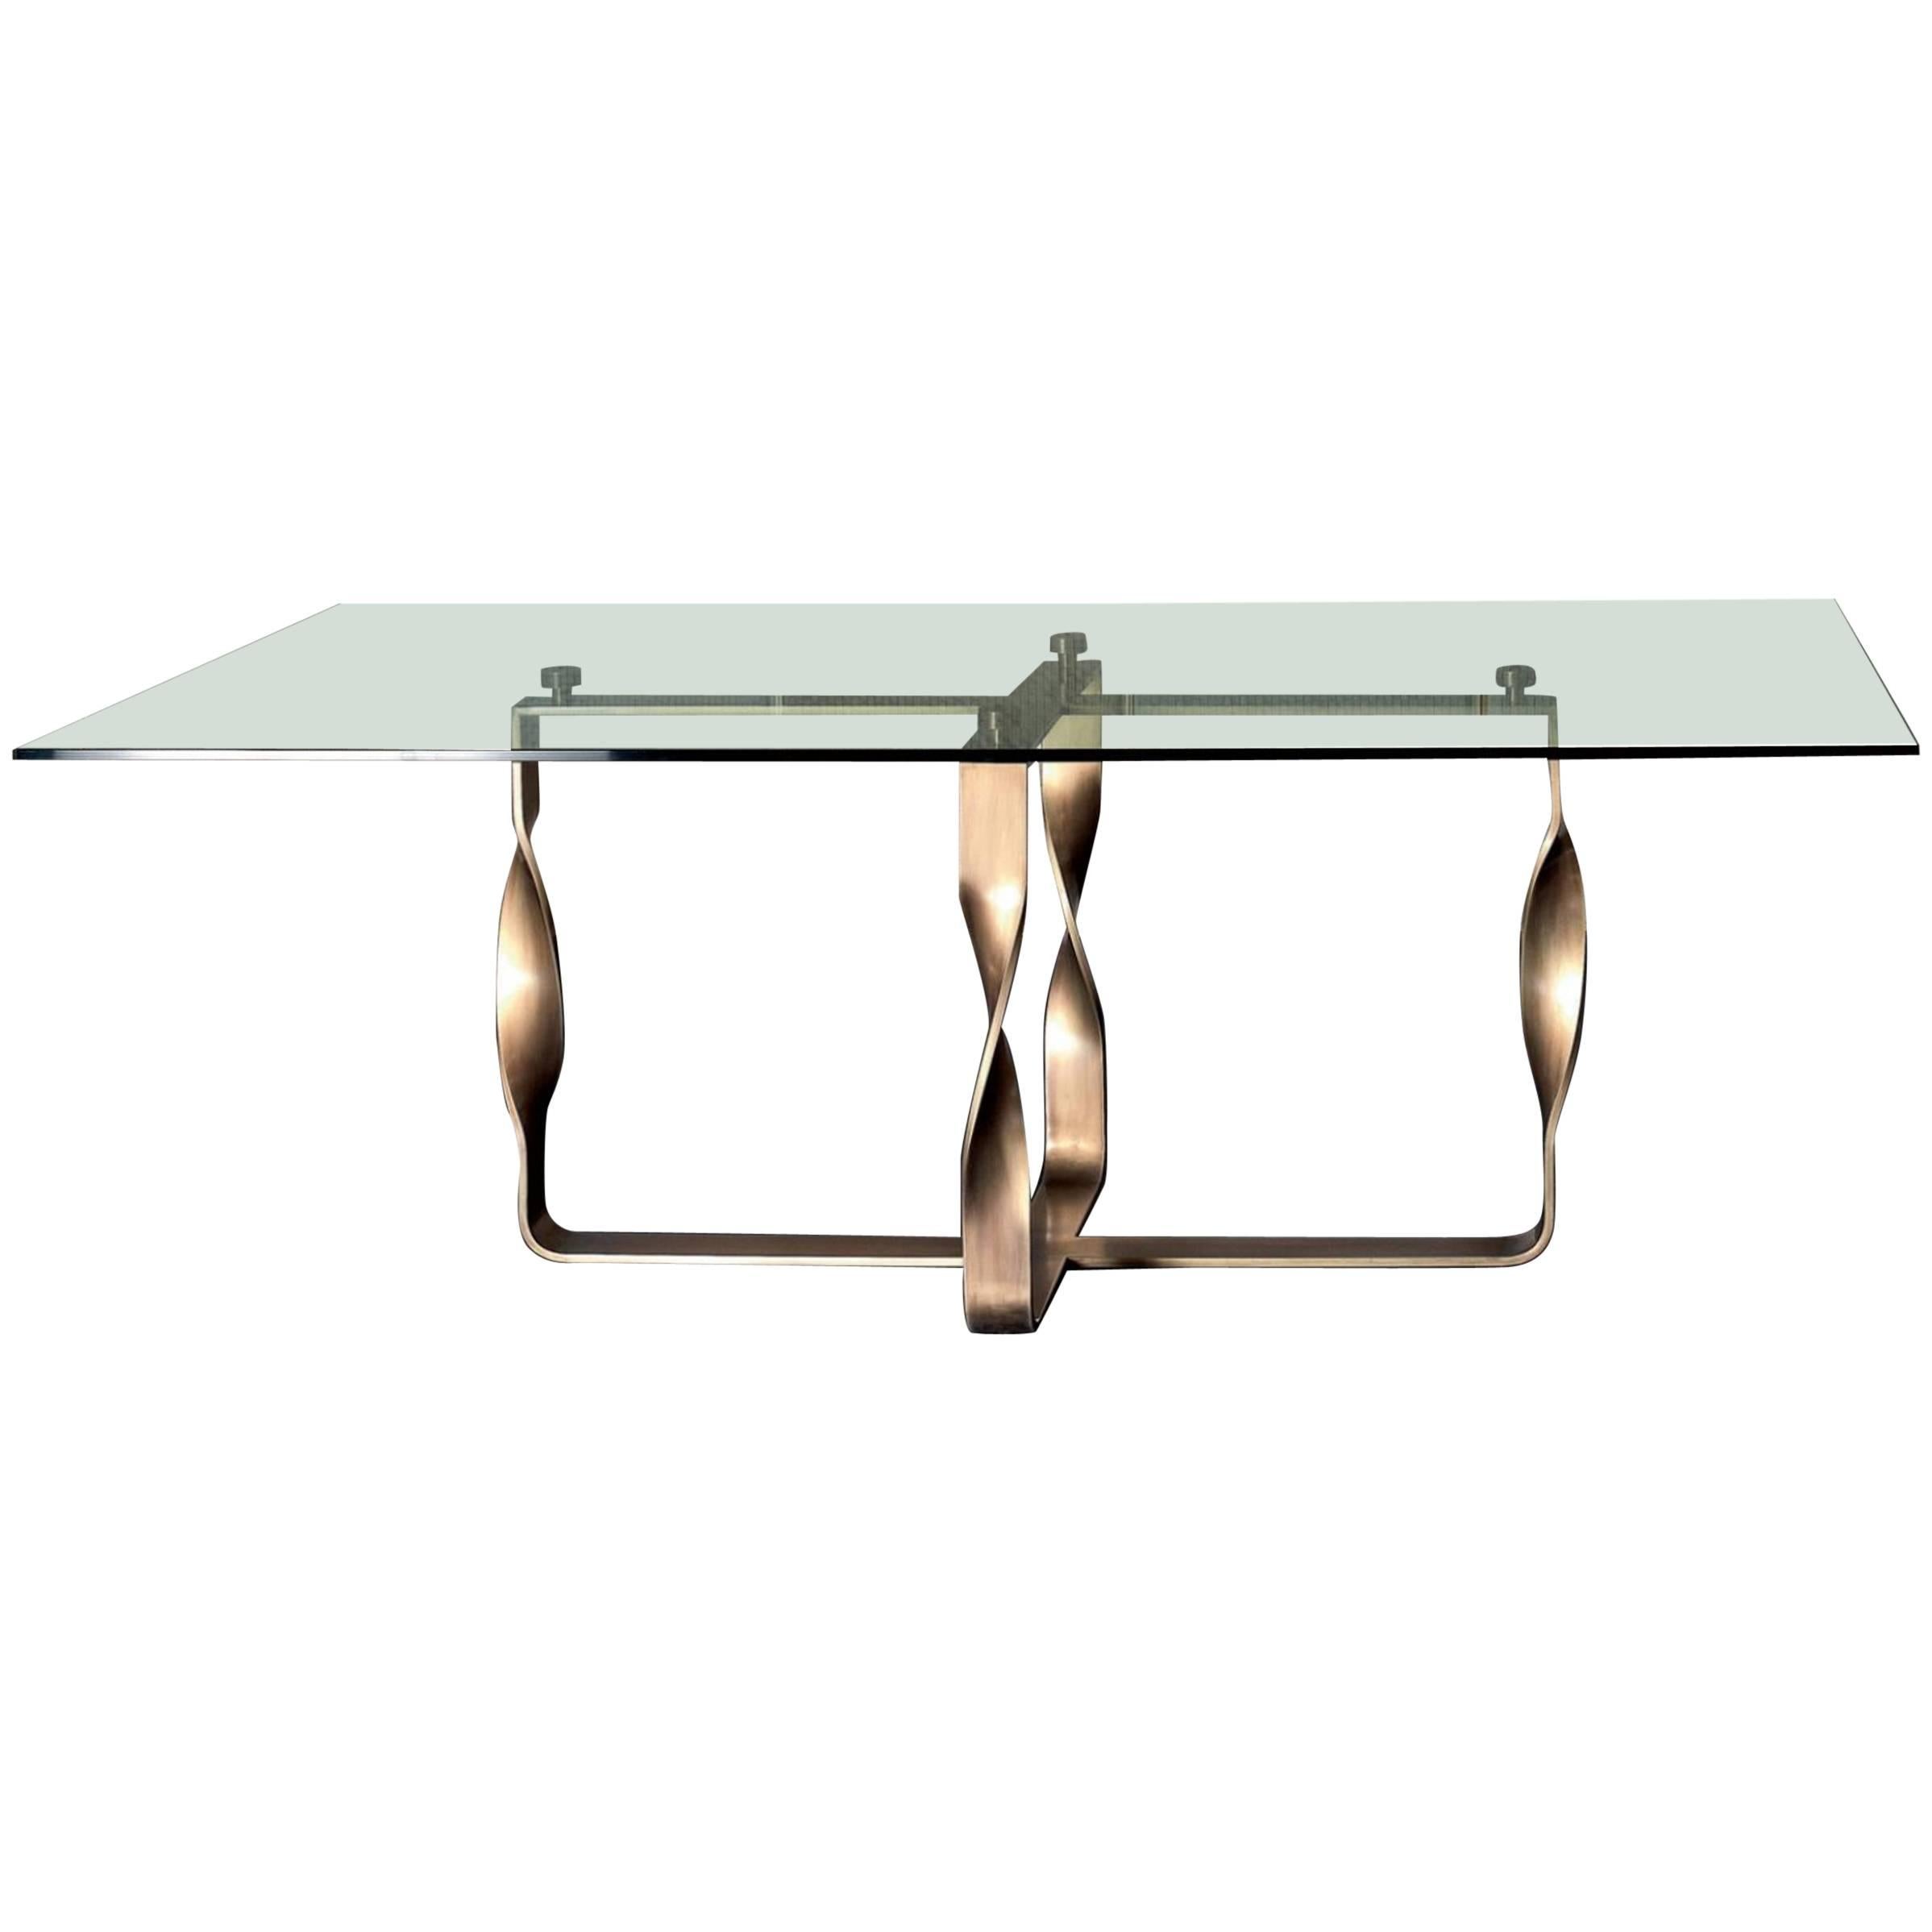 Torsade Table Bronze Base Legs and Glass Top